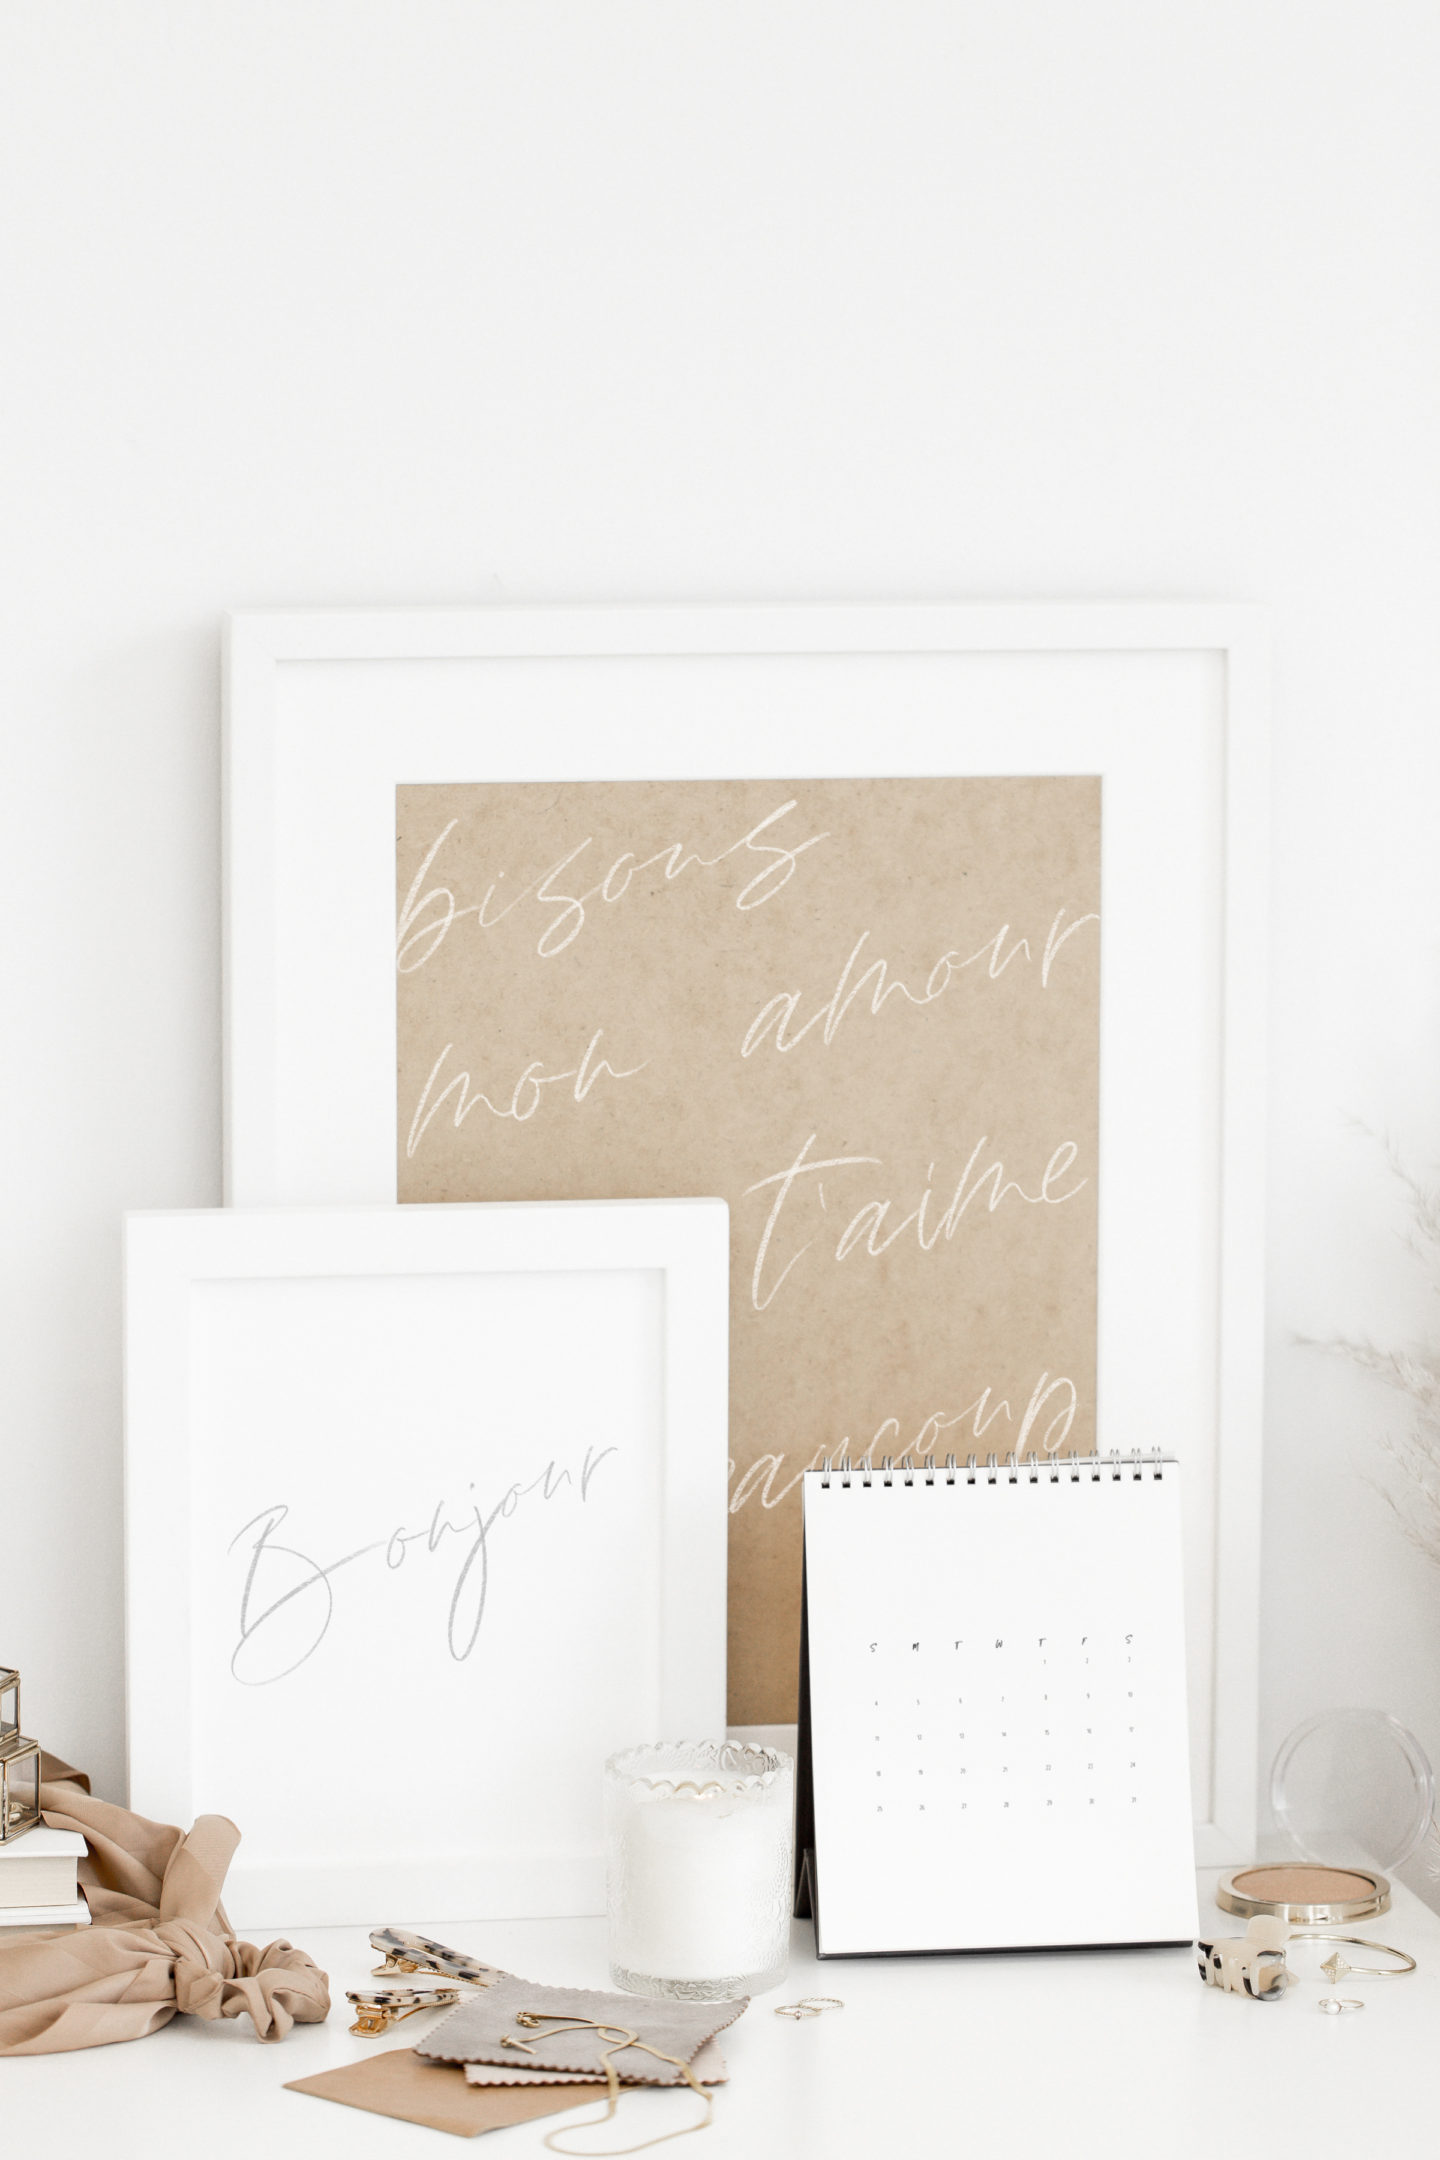 Transitioning into Fall The Healthy Way; The Pursuit of L; Neutral tone setting with white picture frame and calendar